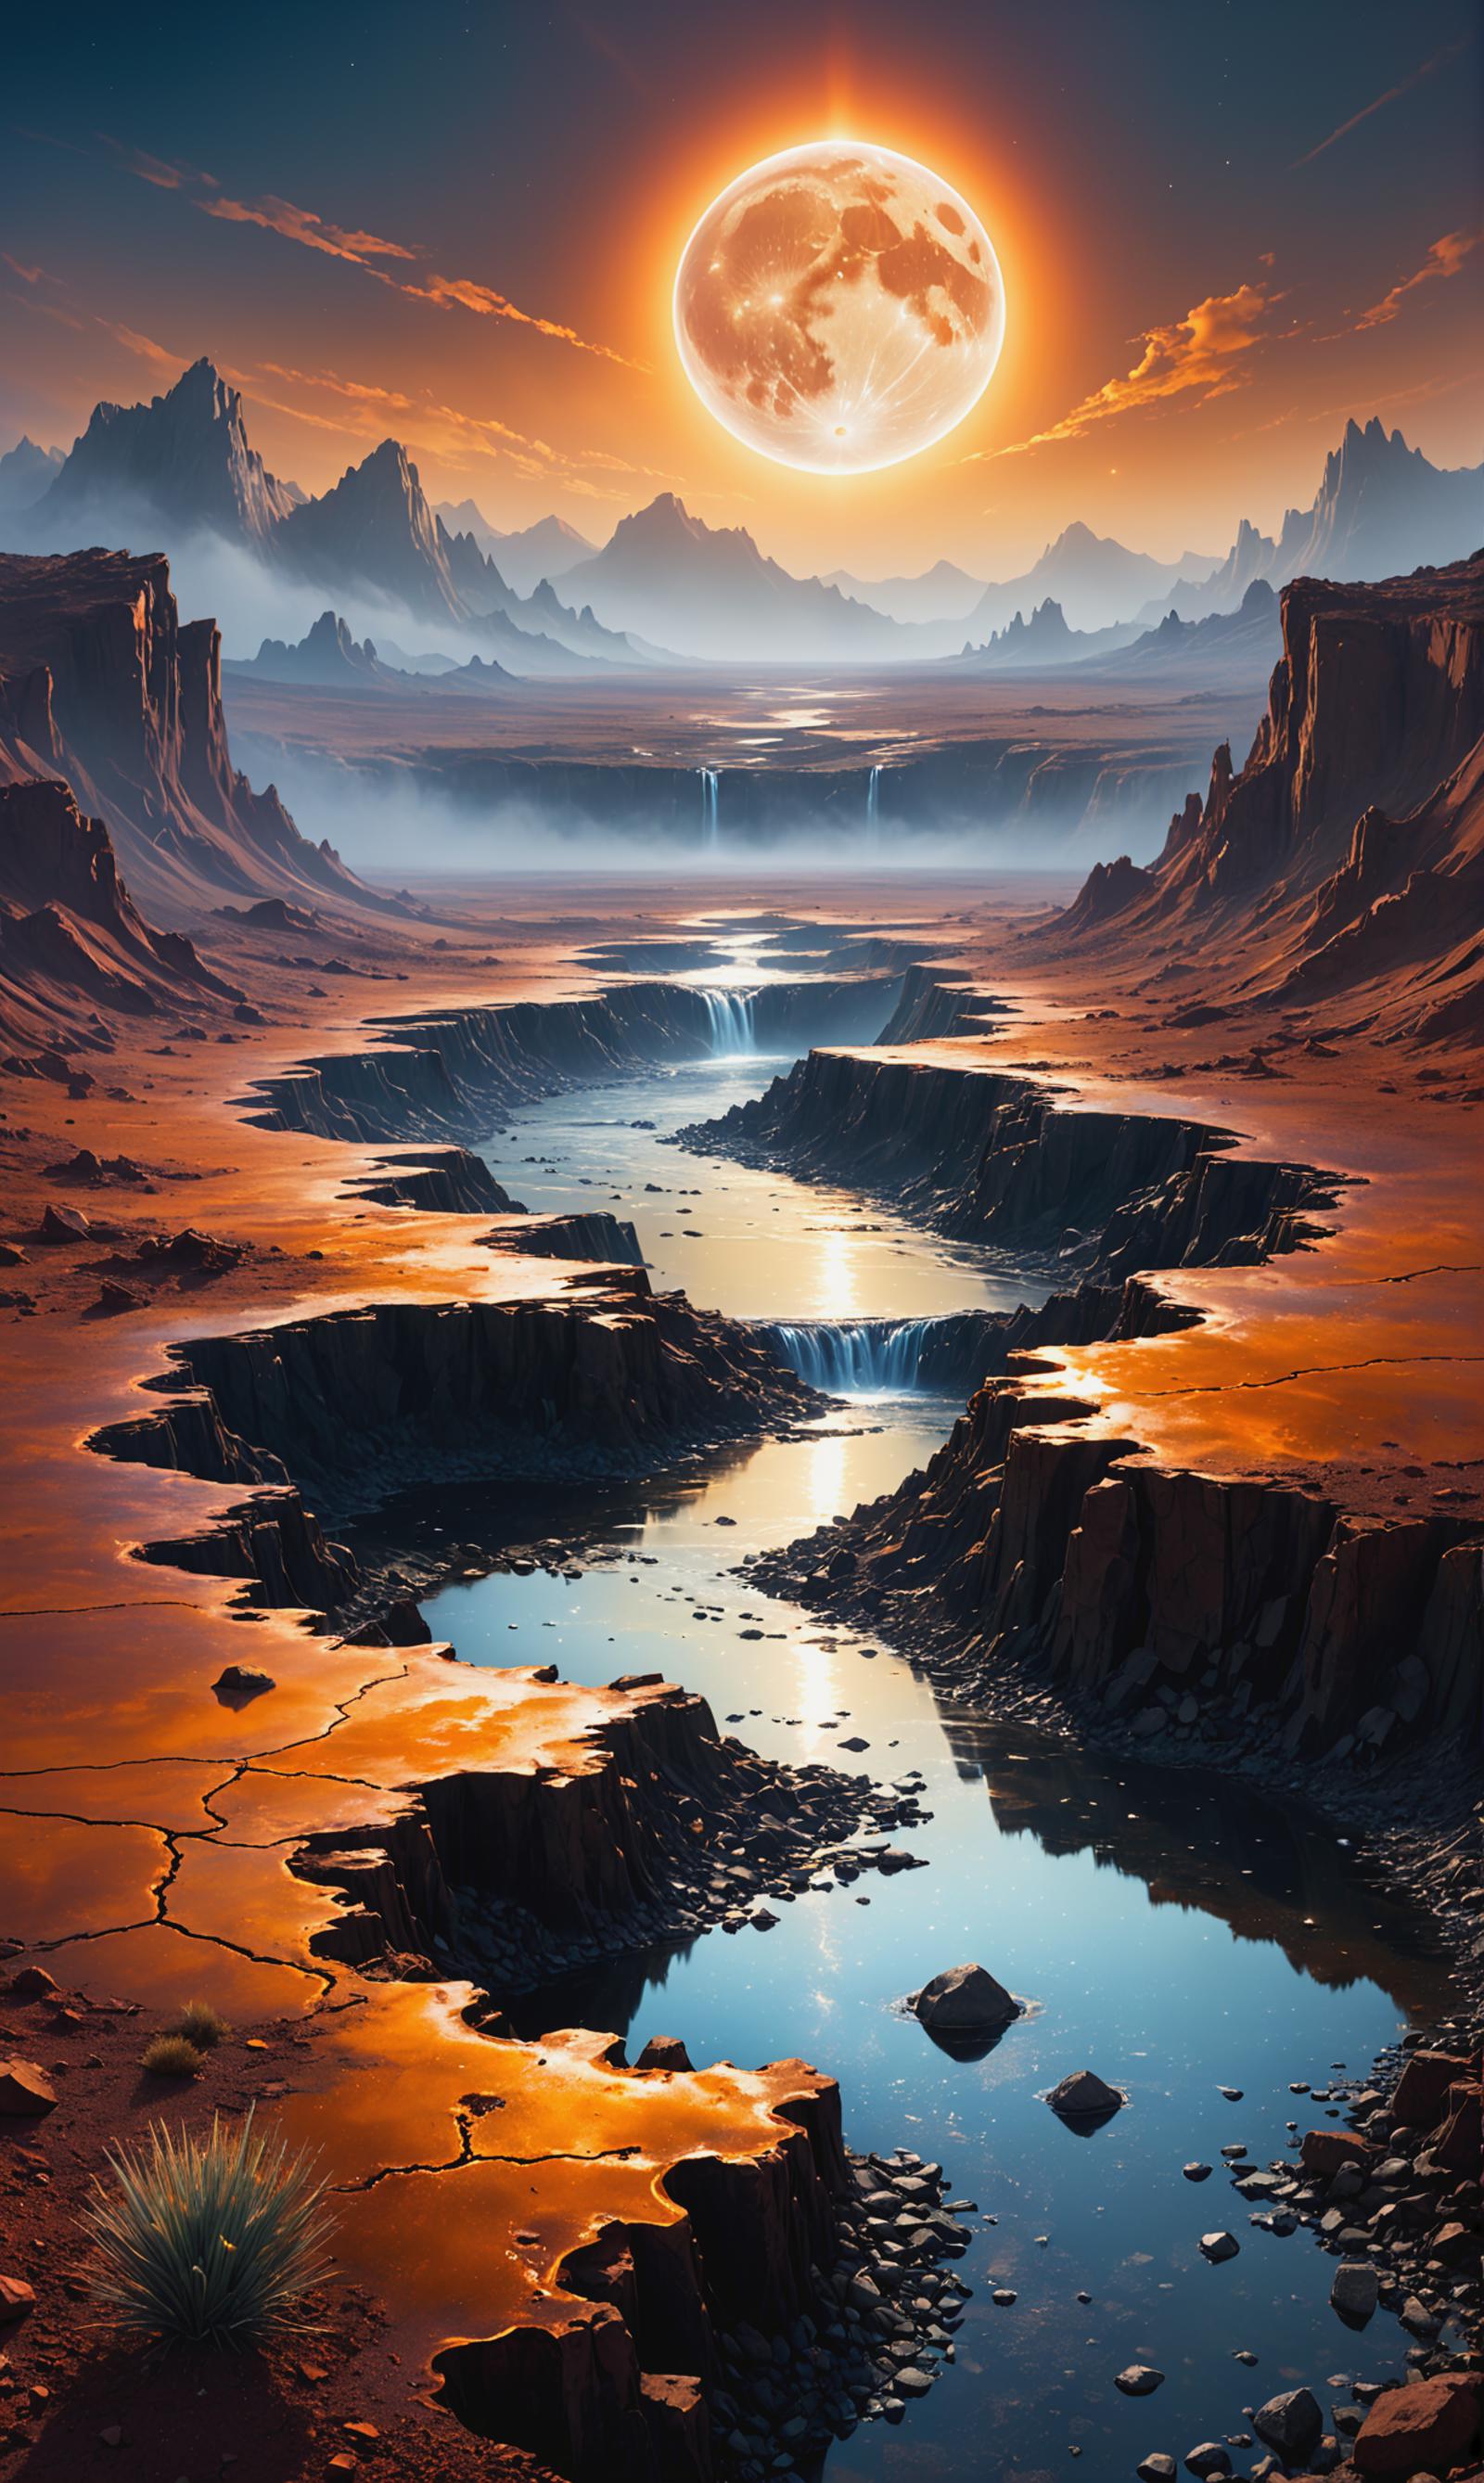 A Painting of a River Between Two Cliffs at Sunset